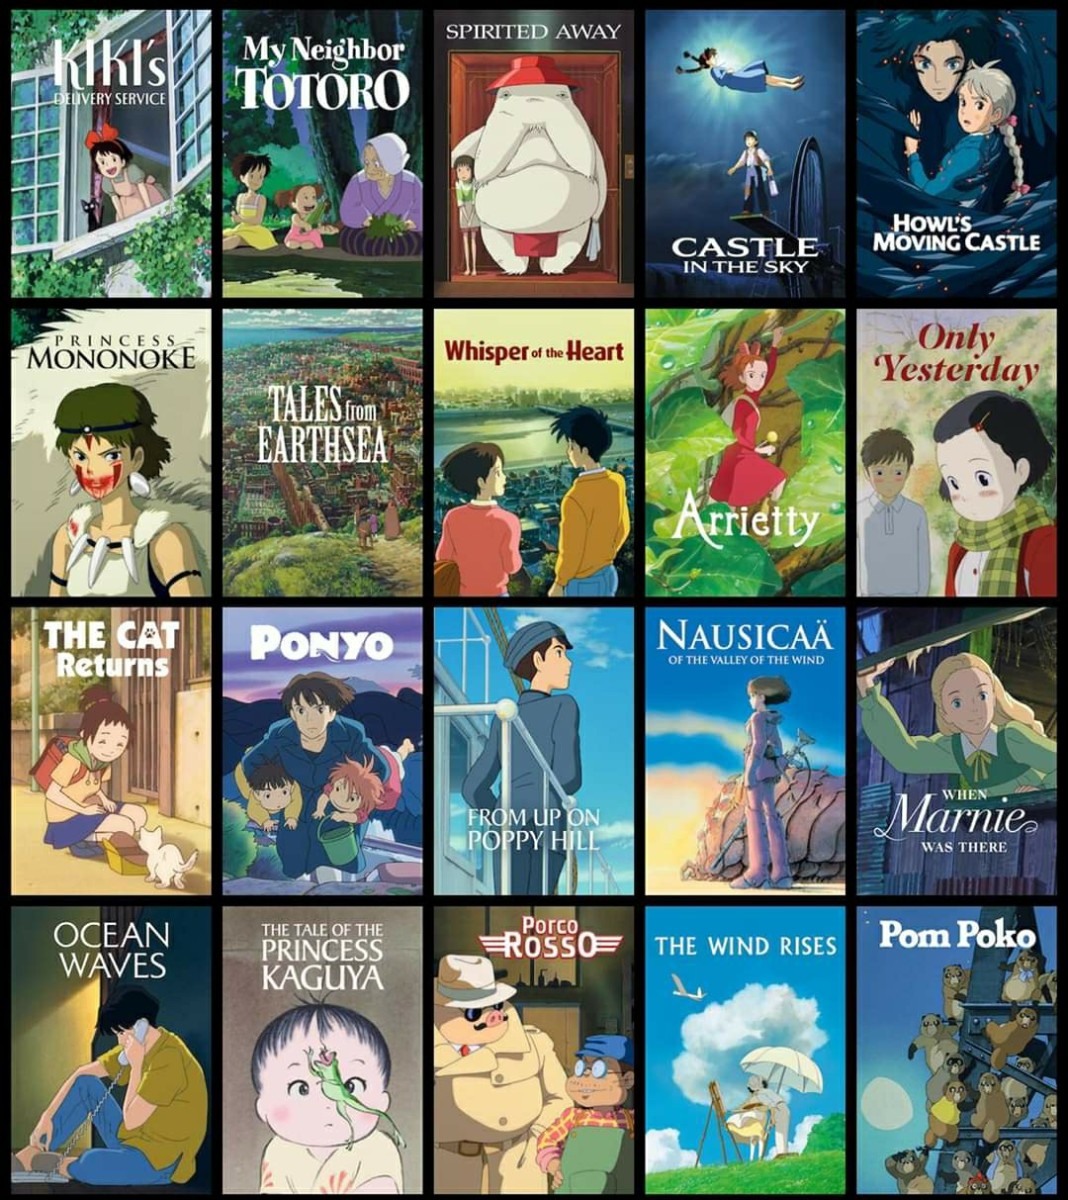 31 Top Images Ghibli Movies Netflix America / When Marnie Was There Movie Review | Studio Ghibli On Netflix